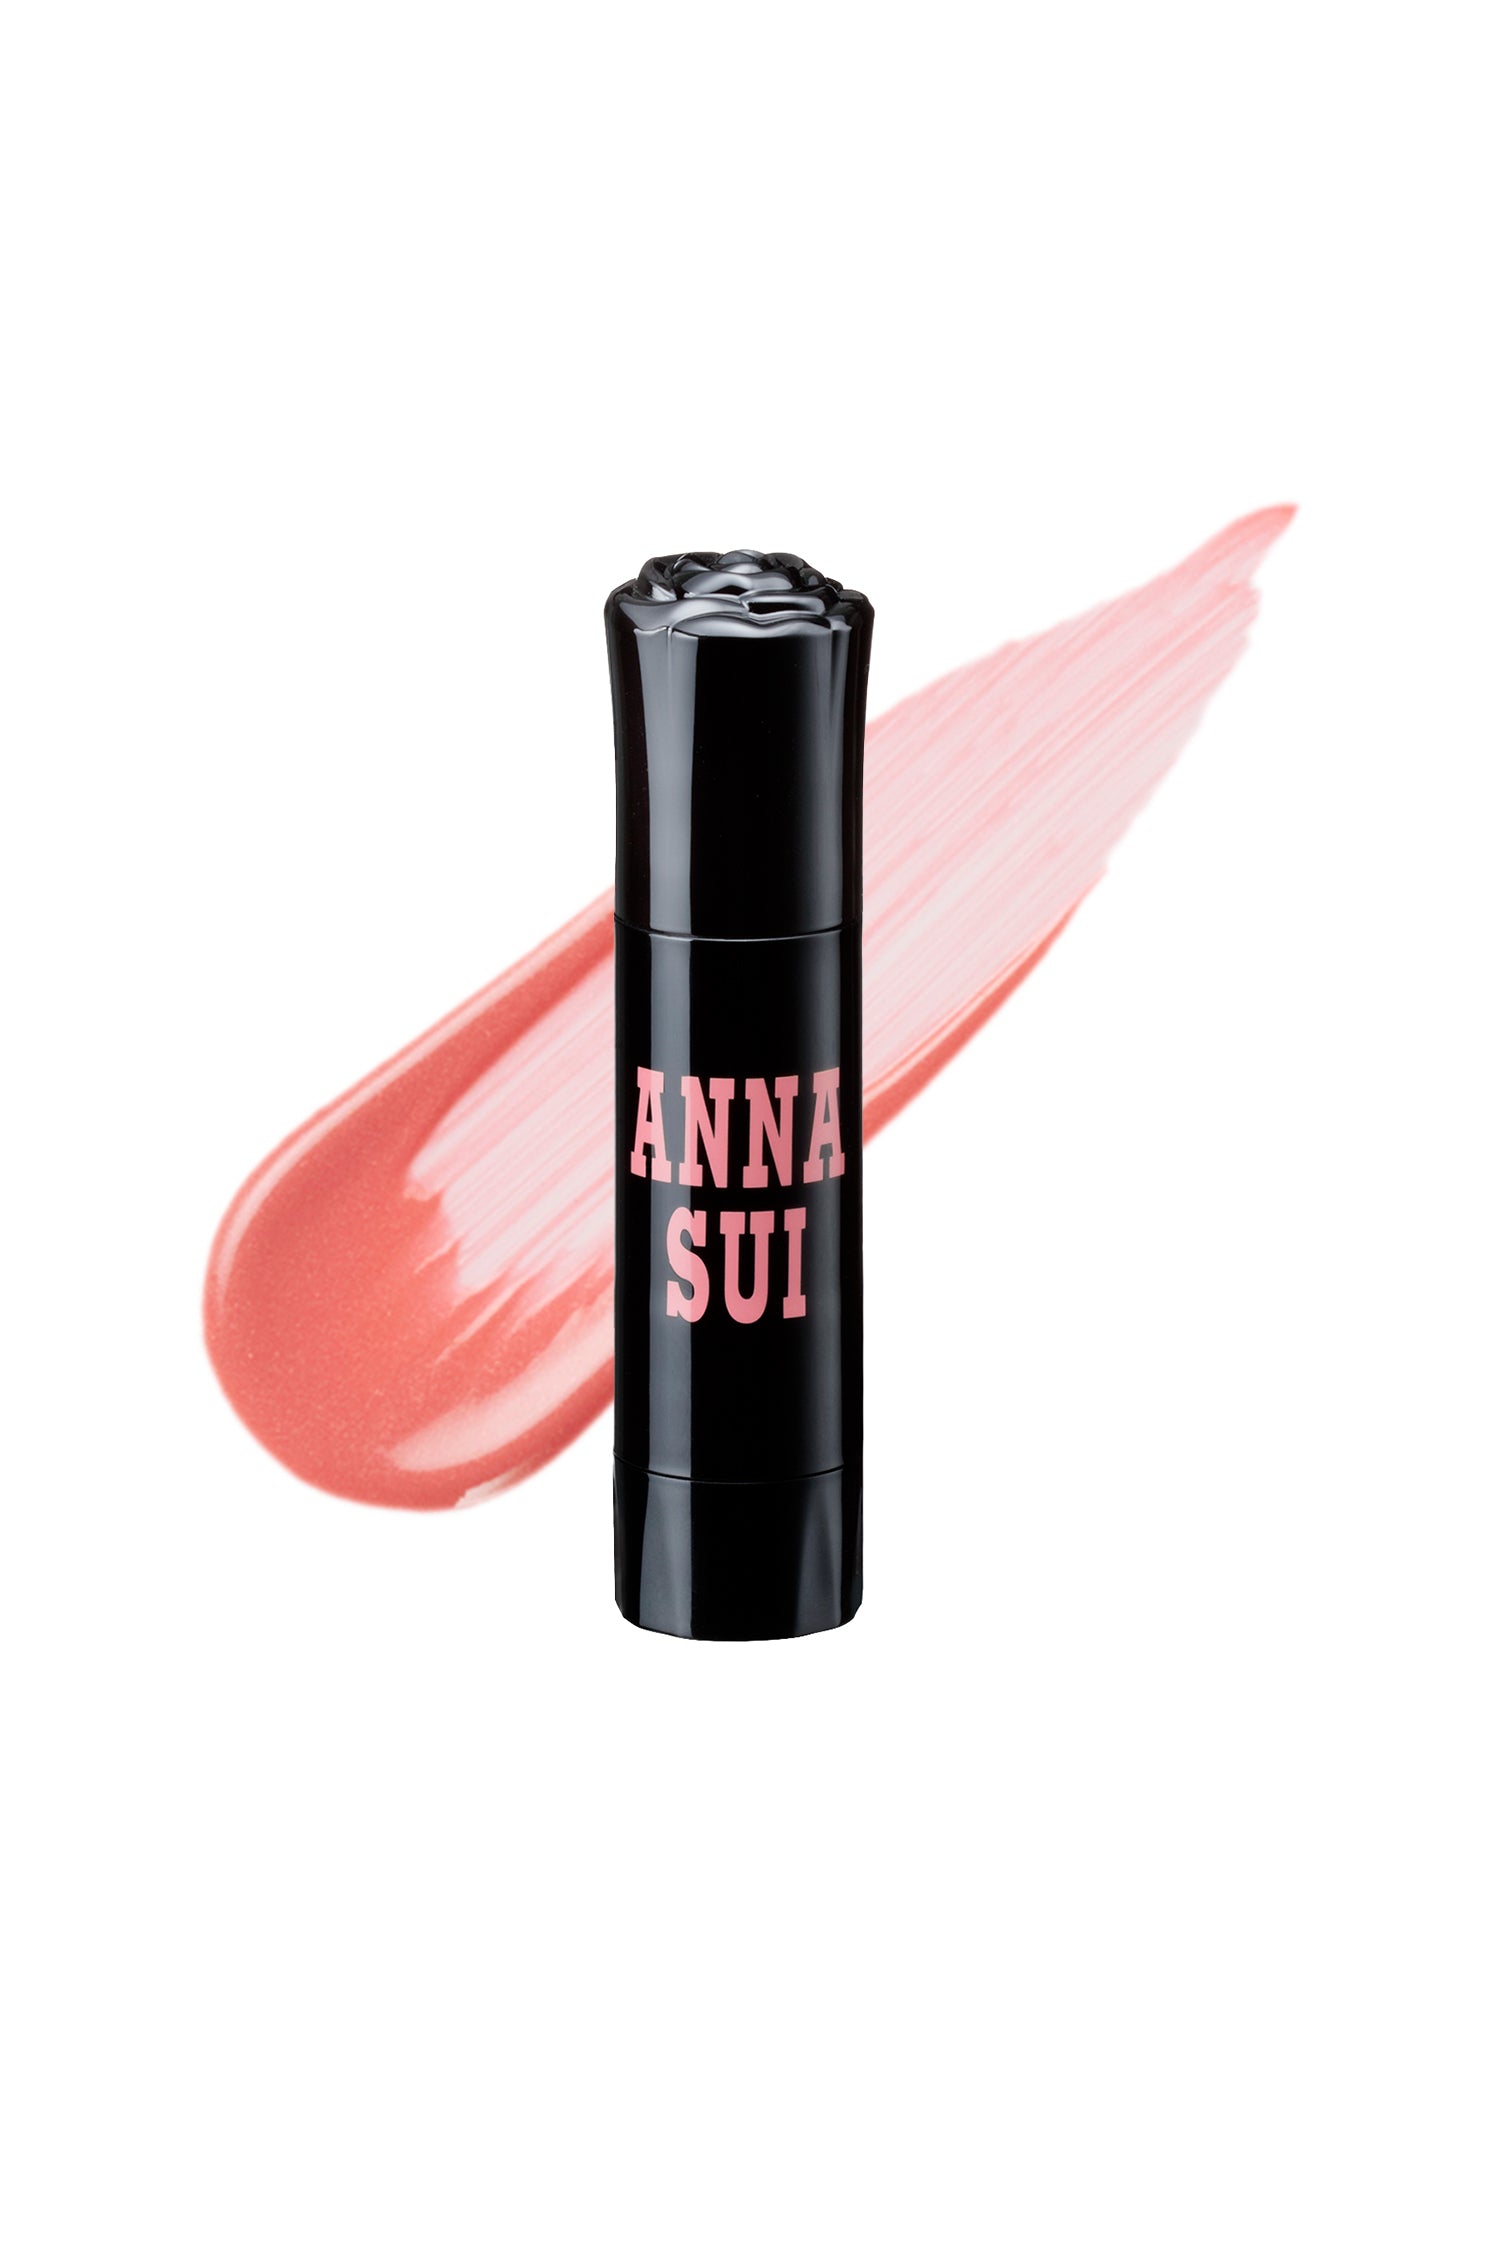 PEACH - Anna Sui color match the product on cylinder case with a rose on top